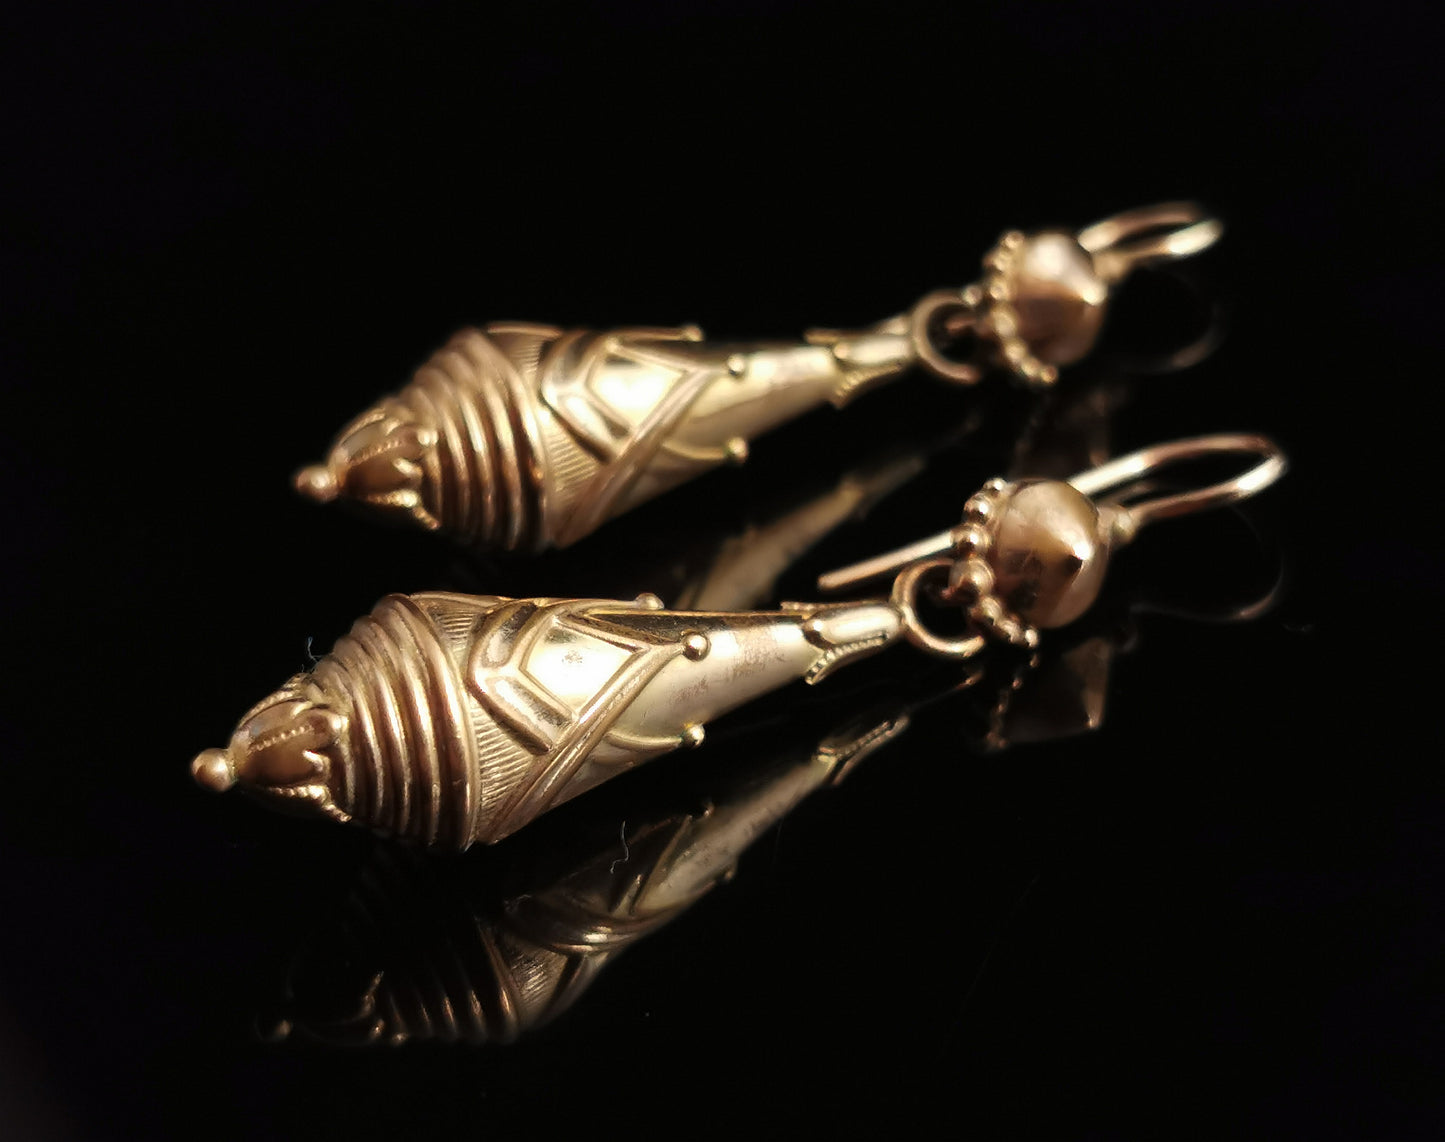 Victorian drop earrings, Etruscan revival, gold plated